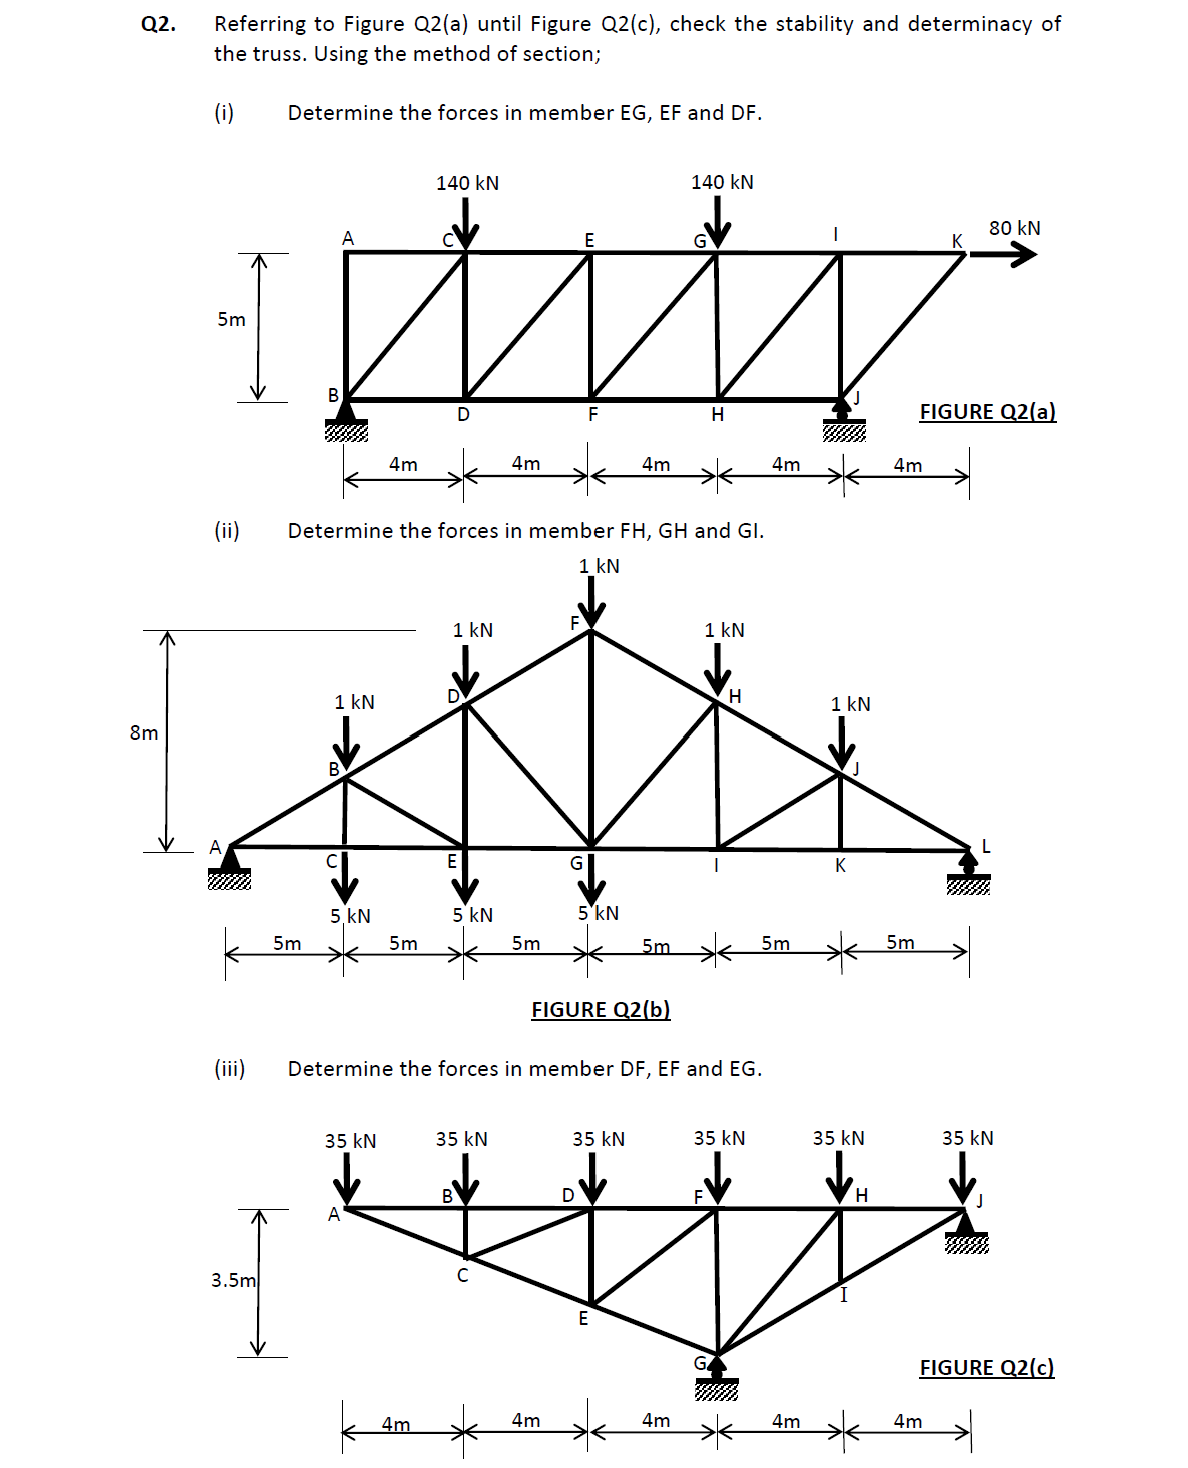 Q2.
8m
Referring to Figure Q2(a) until Figure Q2(c), check the stability and determinacy of
the truss. Using the method of section;
(i)
5m
(ii)
(iii)
3.5m
Determine the forces in member EG, EF and DF.
B
5m
A
1 kN
5. KN
4m
35 kN
A
5m
140 kN
Determine the forces in member FH, GH and Gl.
1 kN
4m
E
W
F
D
1 kN
E
5 kN
4m
35 kN
с
5m
G
4m
5 kN
FIGURE Q2(b)
4m
Determine the forces in member DF, EF and EG.
35 kN
D
5m
E
140 kN
H
4m
1 kN
H
35 kN
4m
5m
4m
1 kN
K
35 kN
H
4m
5m
FIGURE Q2(a)
80 kN
4m
L
35 kN
FIGURE Q2(c)